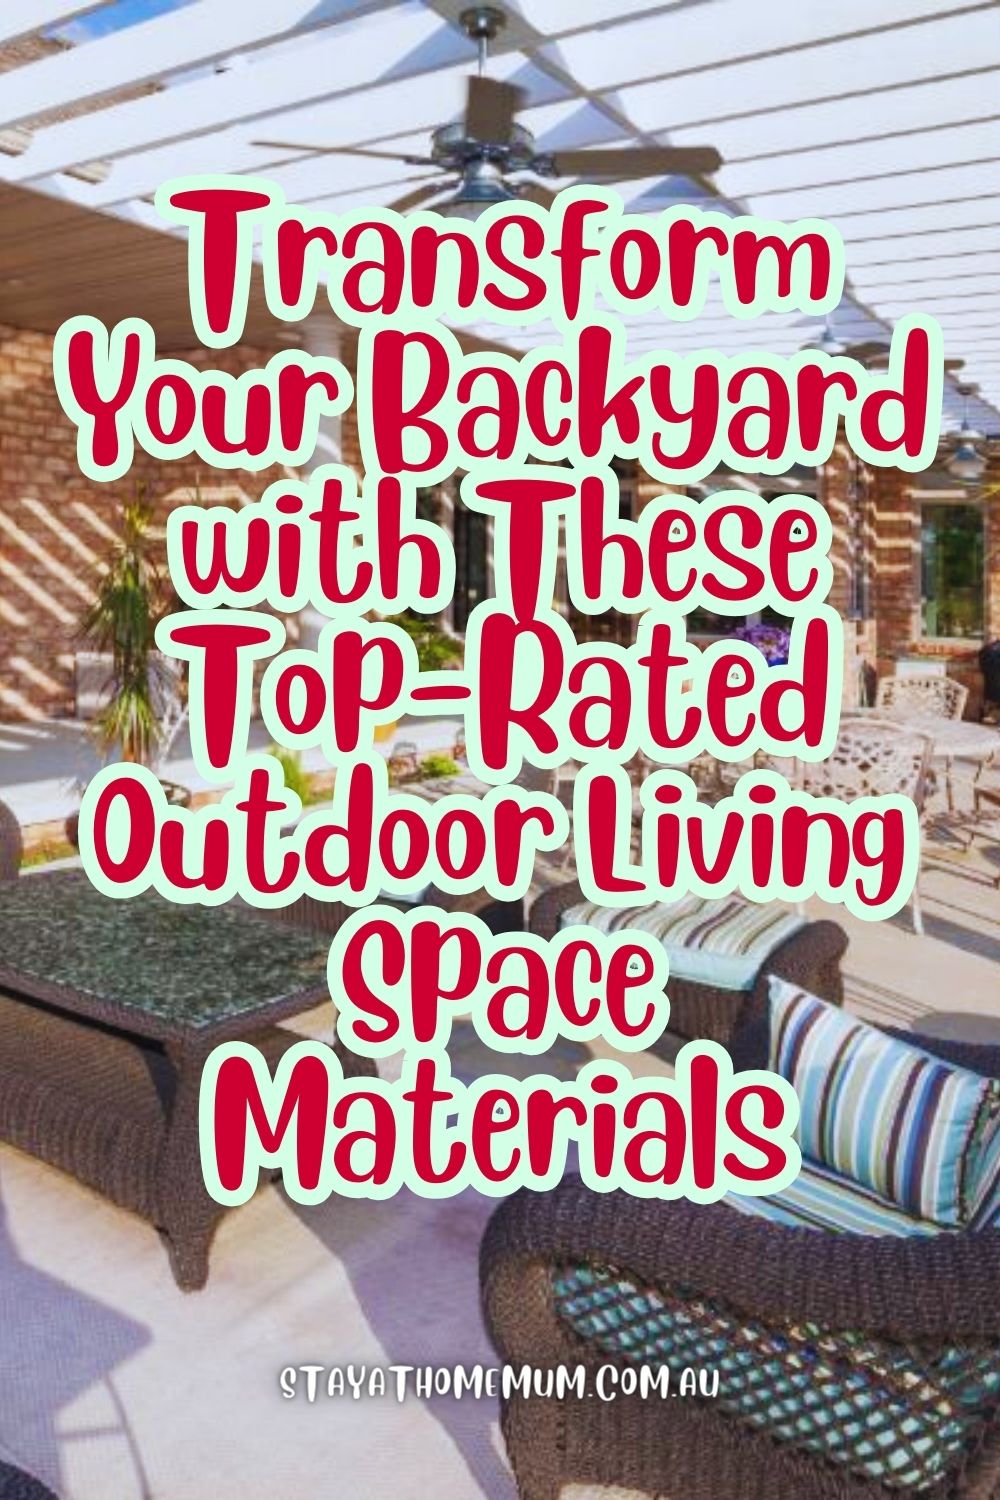 Transform Your Backyard with These Top-Rated Outdoor Living Space Materials Pinnable